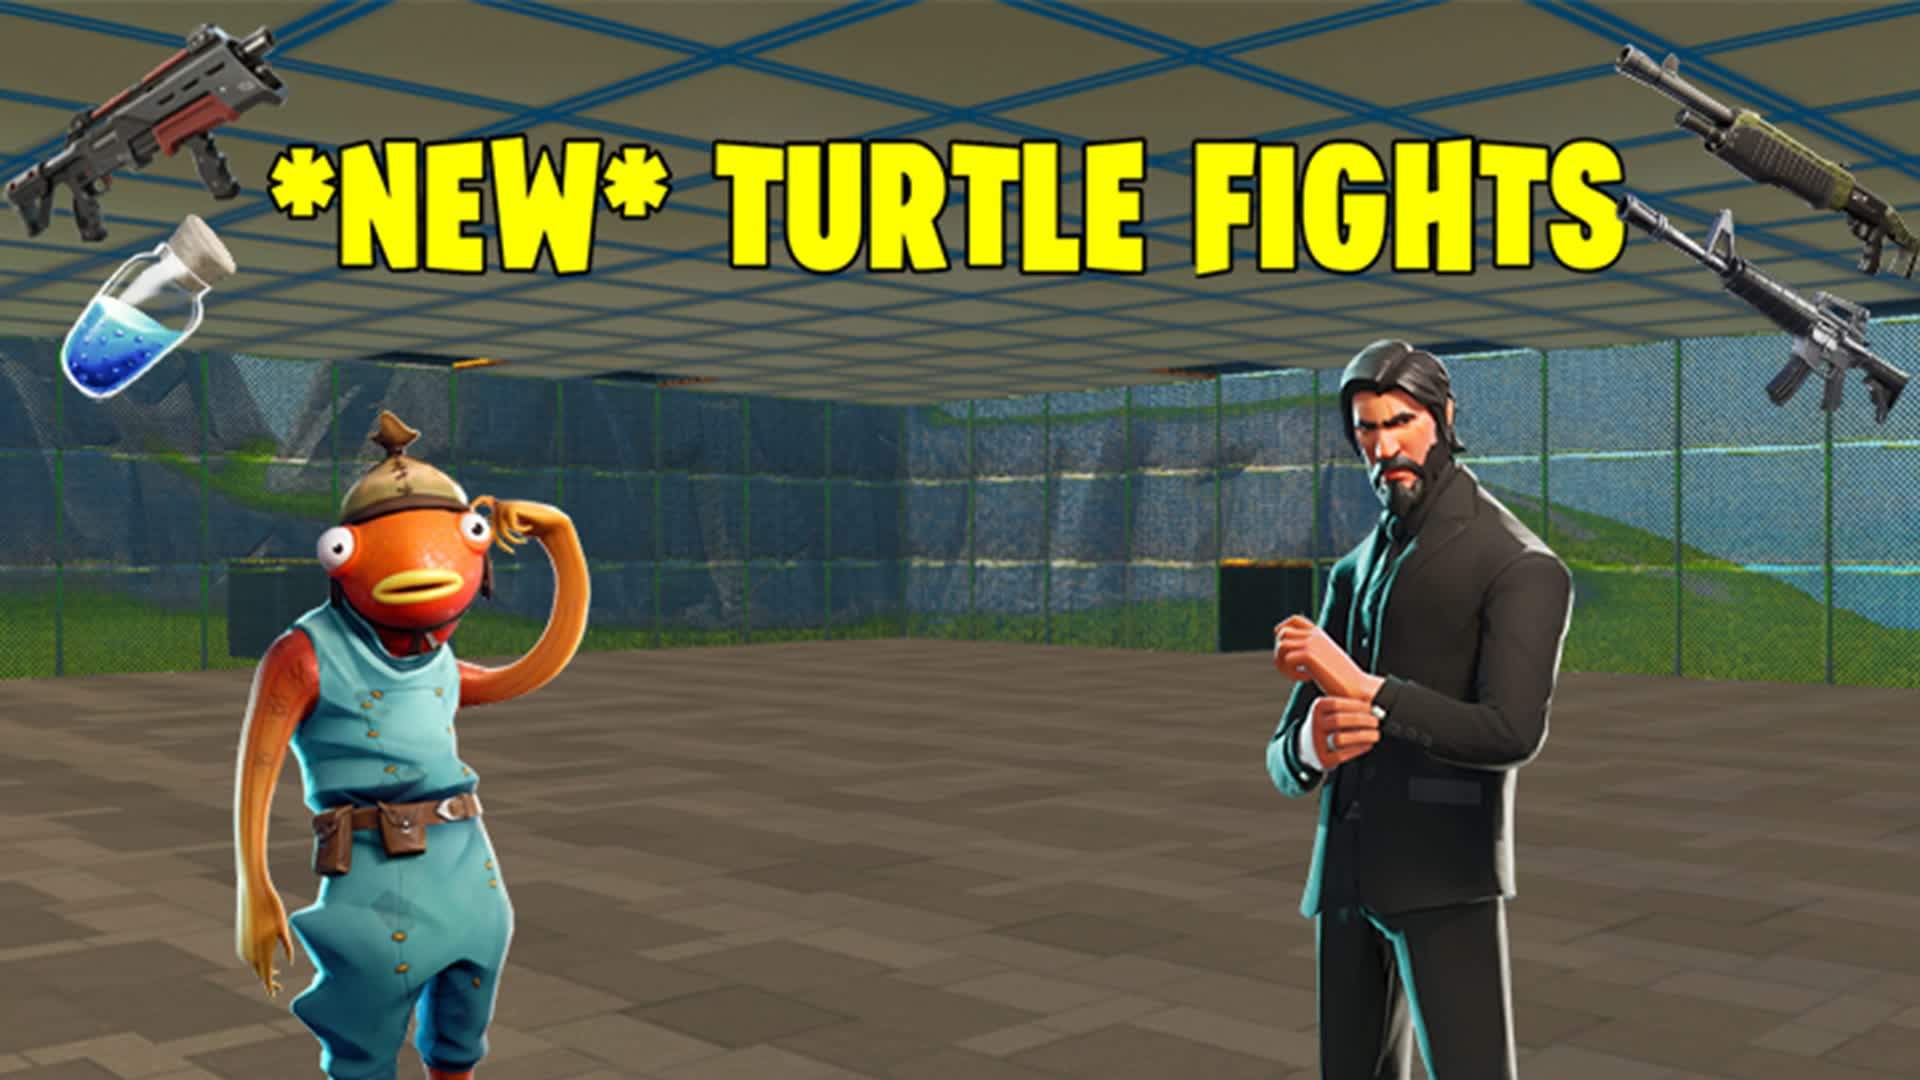 'New' Turtle Fights